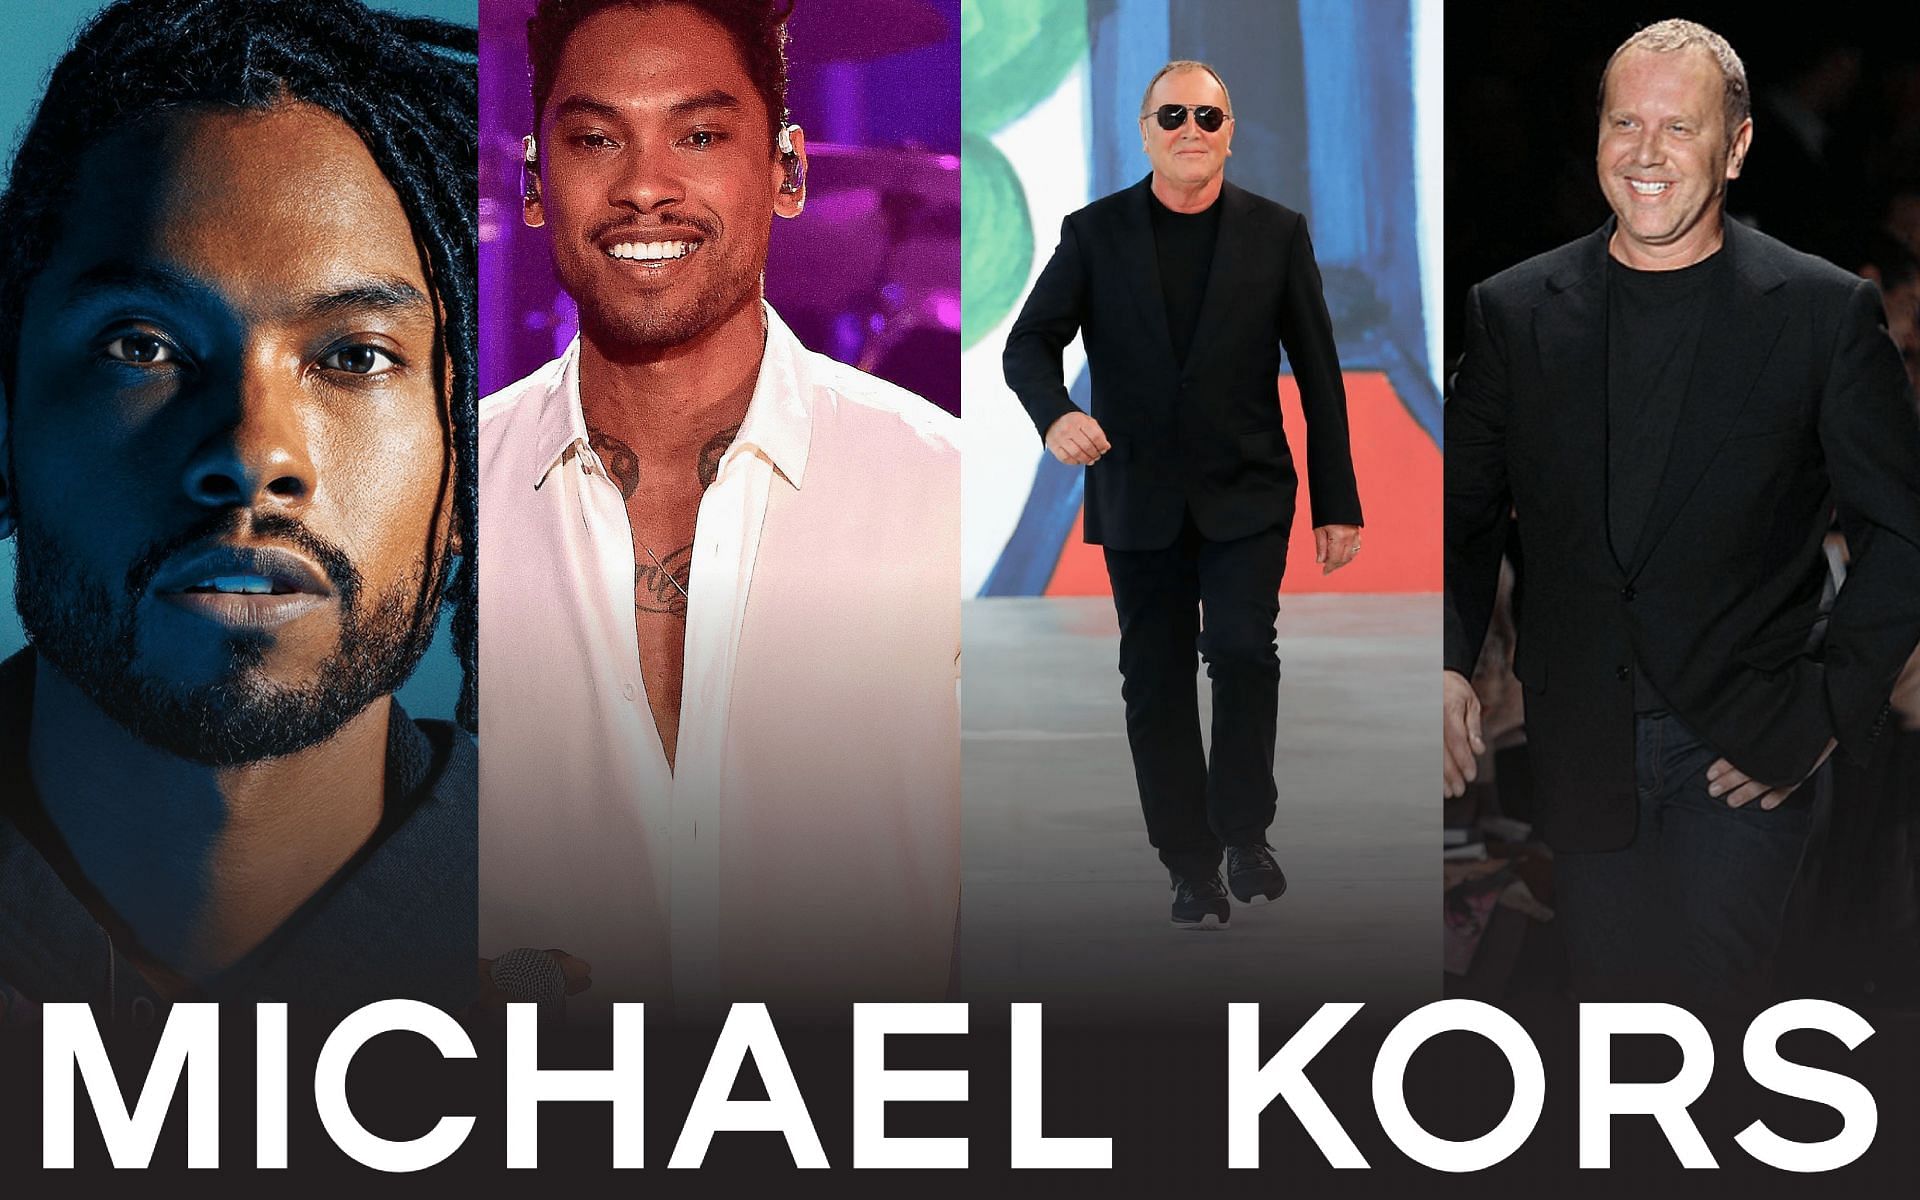 Miguel set to feature live performance at Michael Kors Fall 2022 show (Image via Sportskeeda)